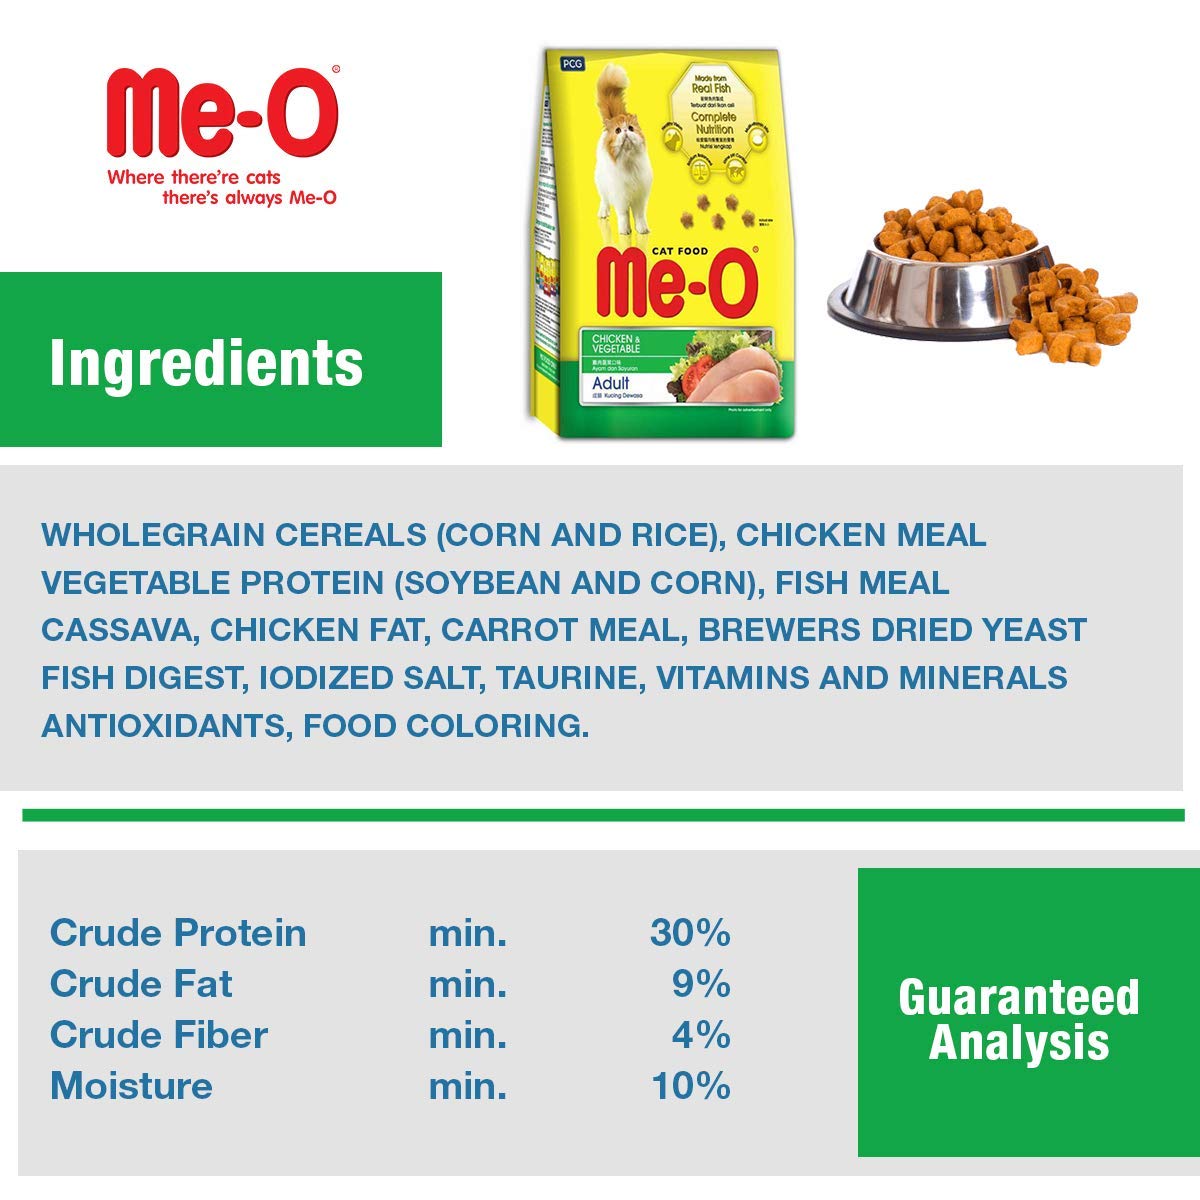 MeO Chicken And Vegetable Adult Cat Dry Food